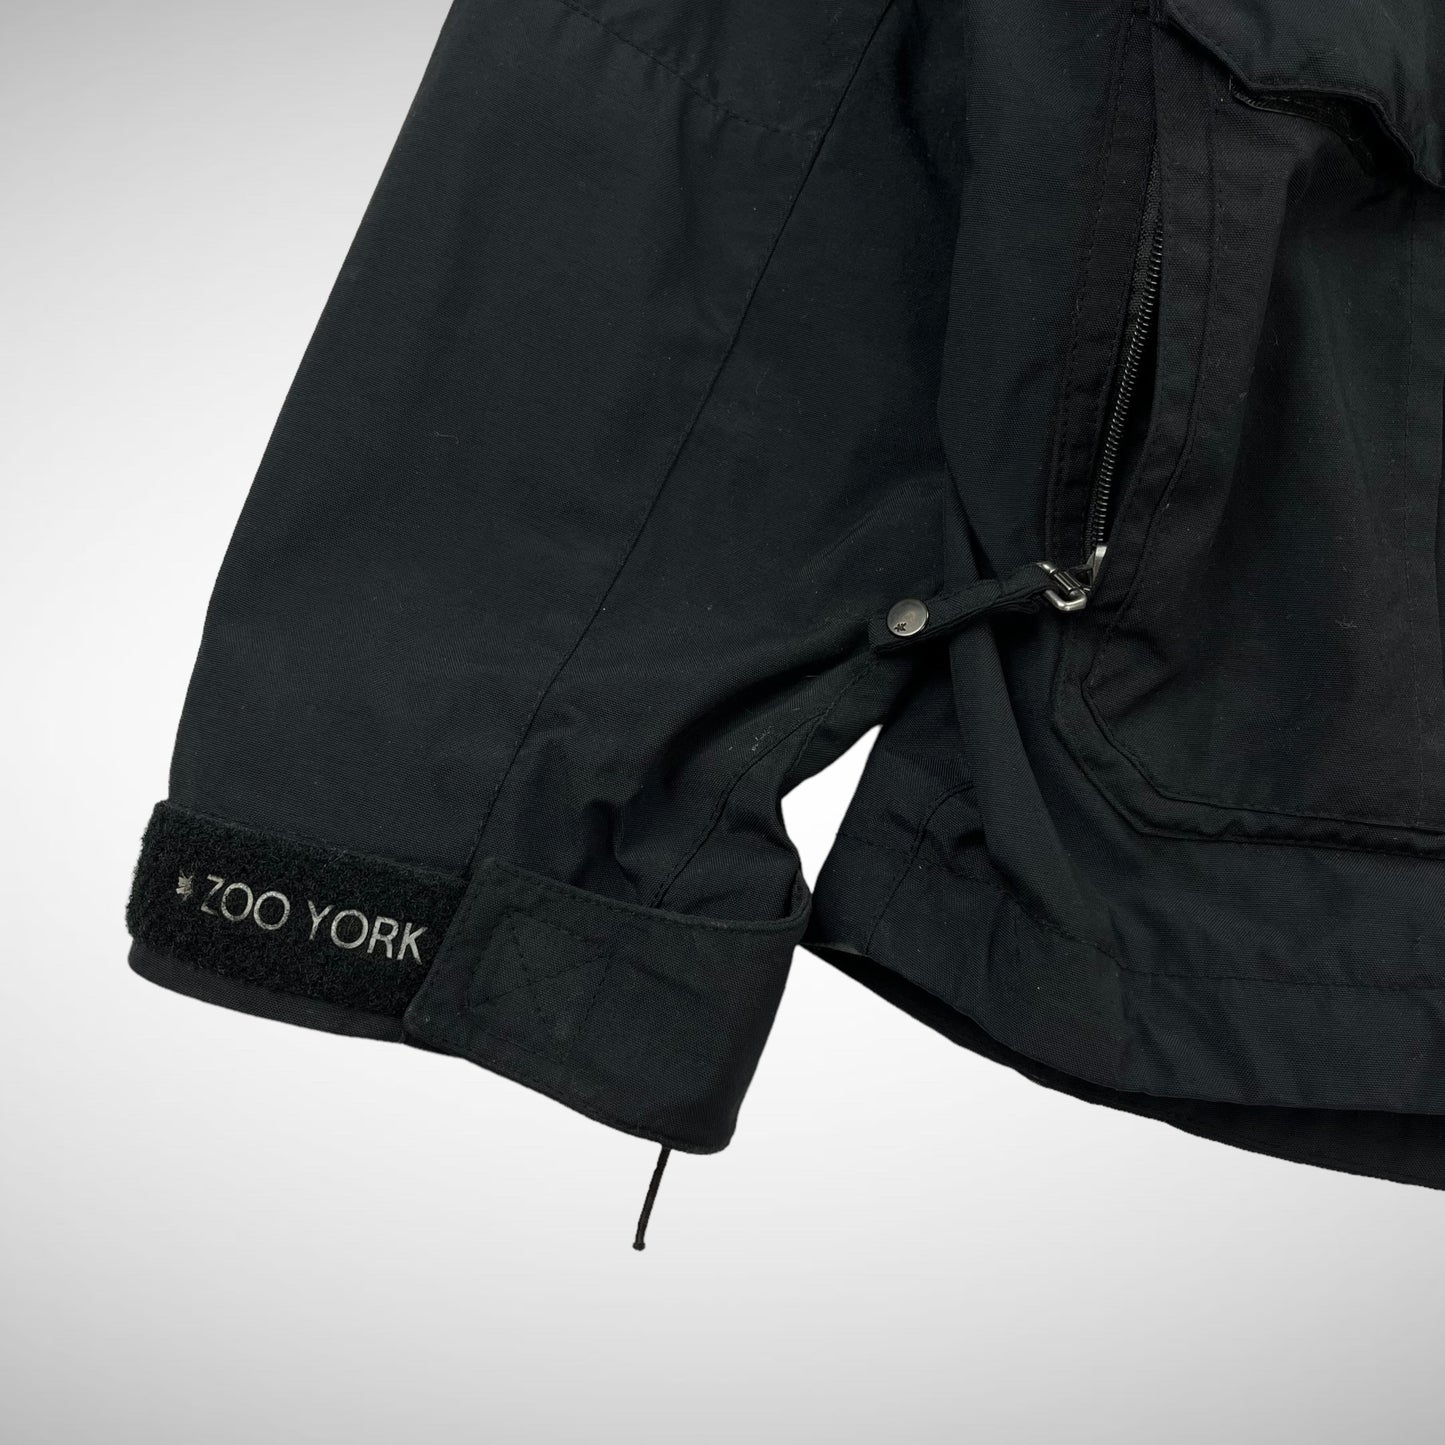 Zoo York Tactical Clothing Division M65 Jacket (2000s)